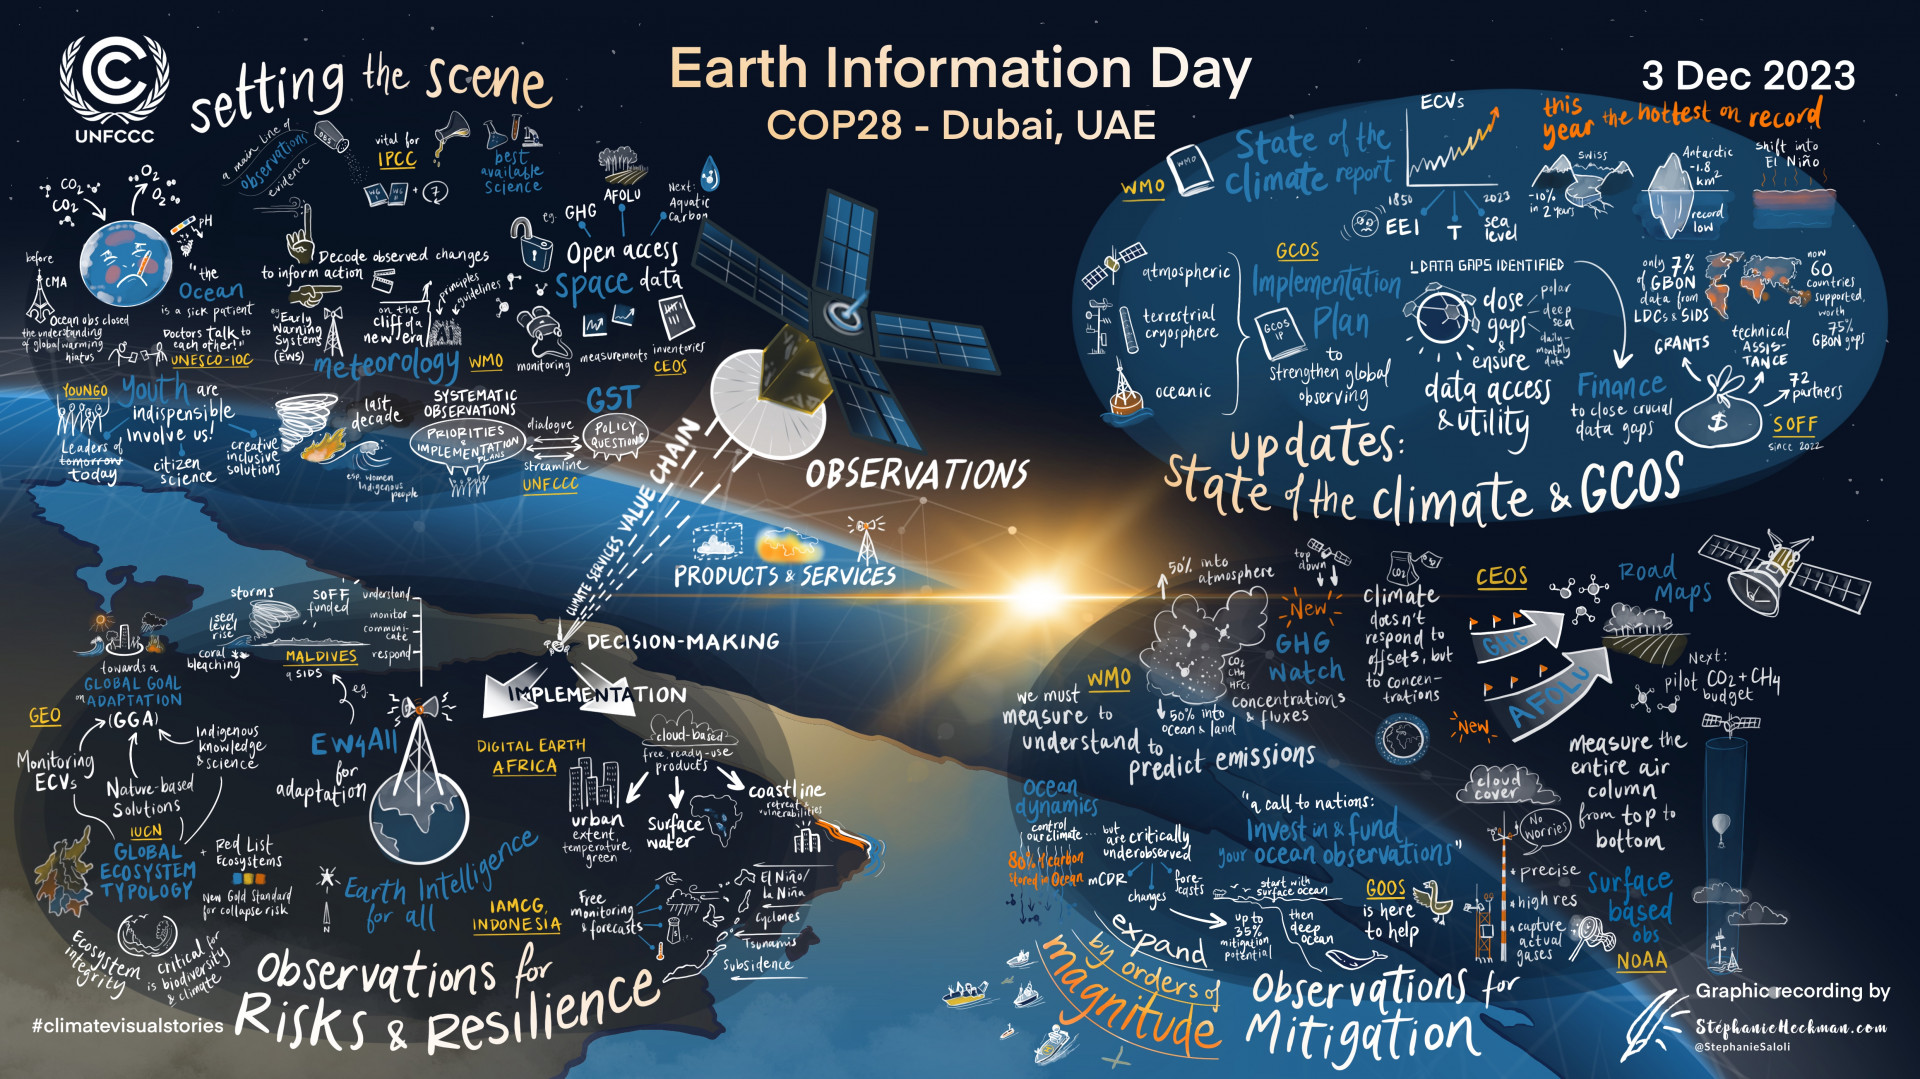 Earth Information Day 2023